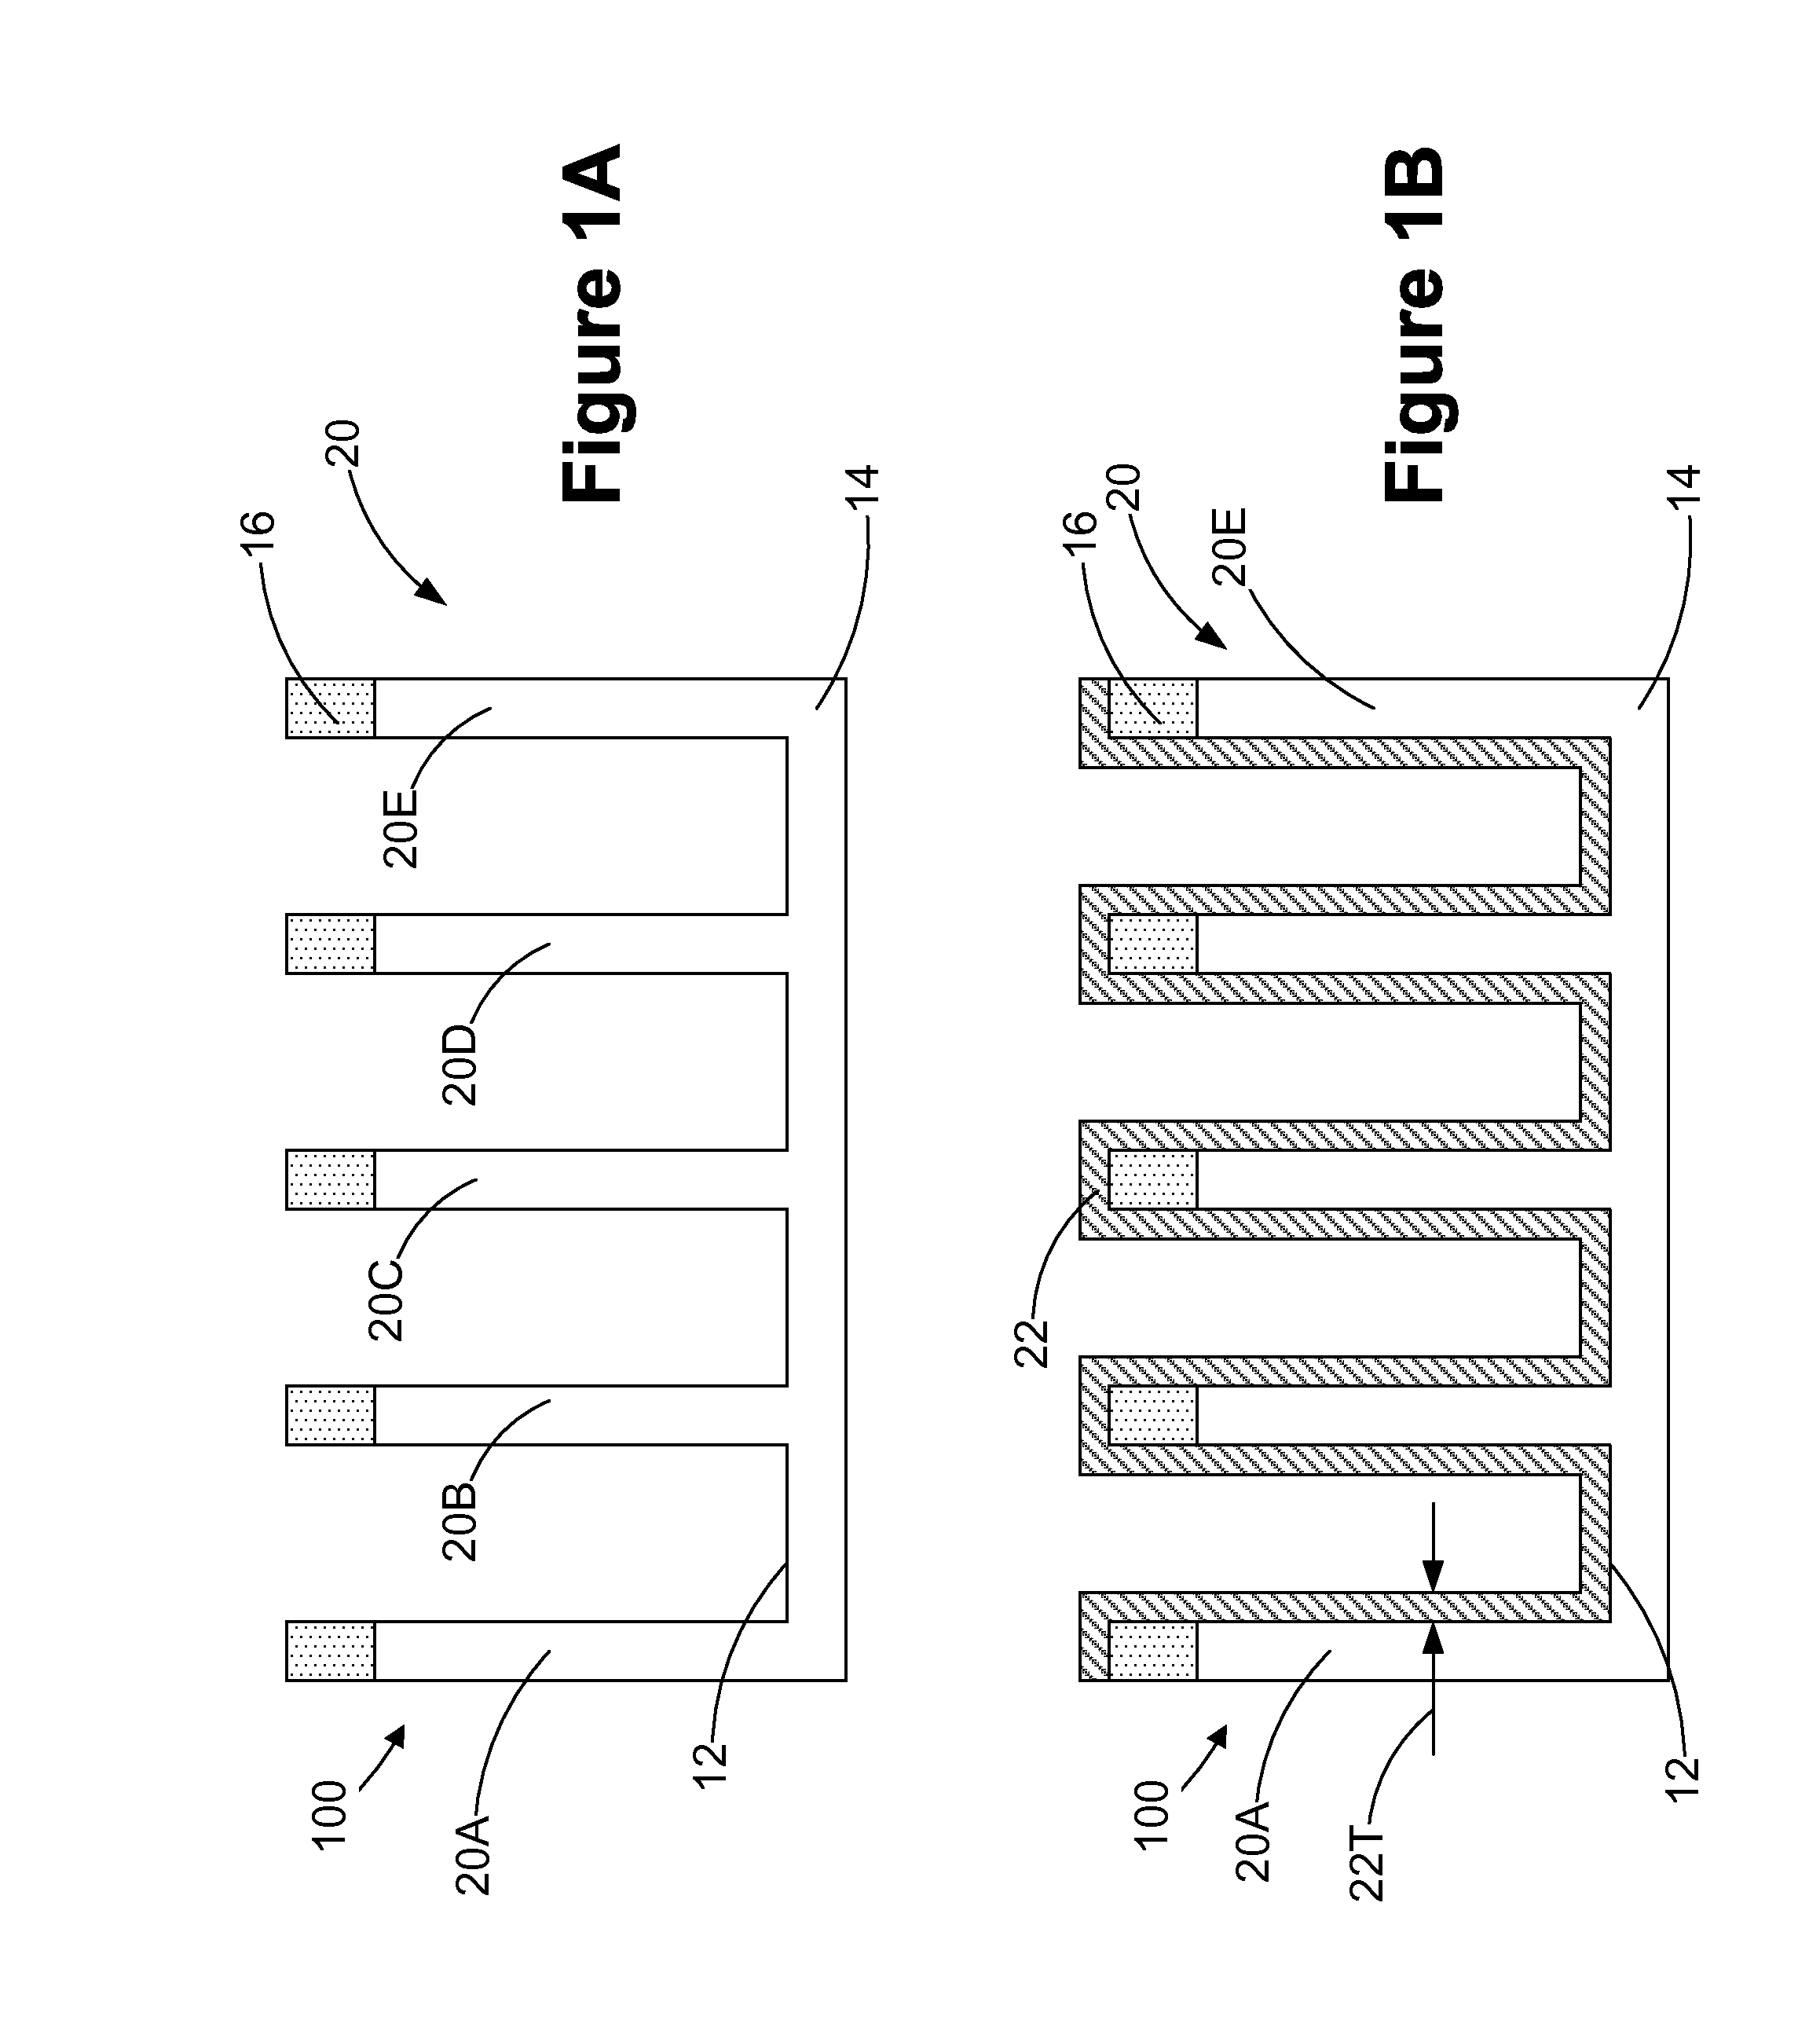 Methods of forming bulk finfet devices by performing a recessing process on liner materials to define different fin heights and finfet devices with such recessed liner materials